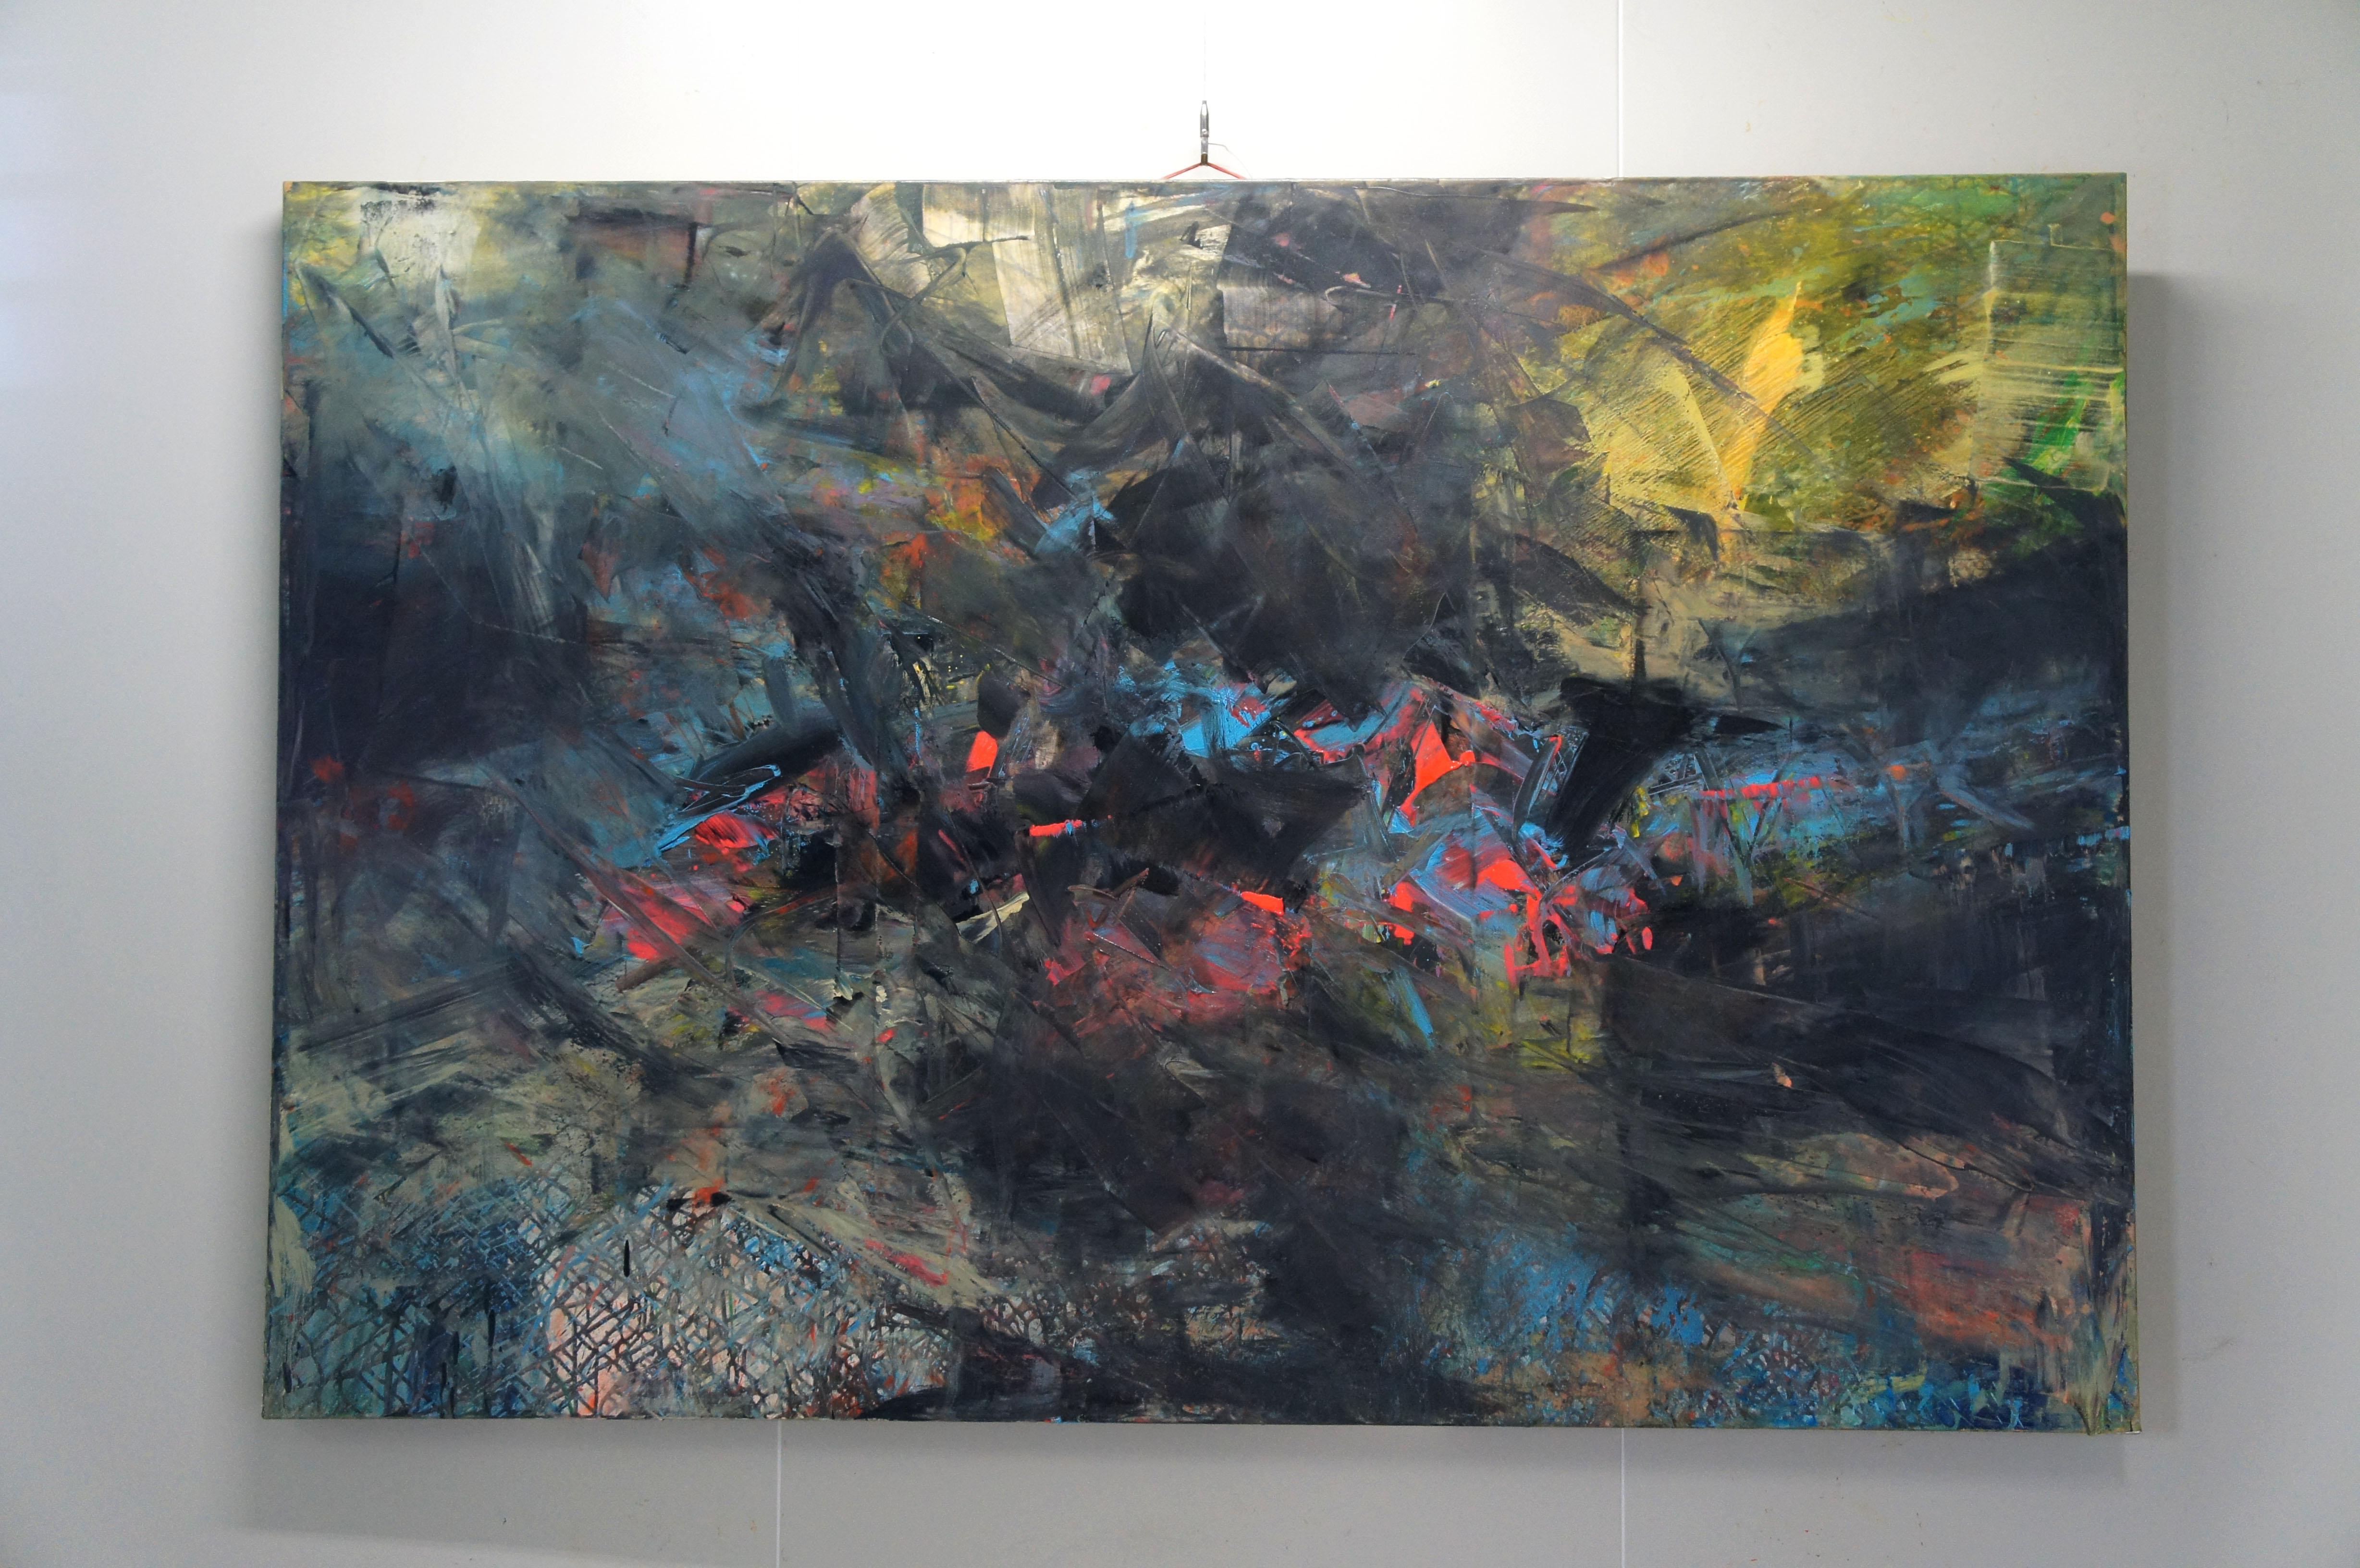 Memory Landscape no7 - Oil Absrtact Painting, 2020 - Black Abstract Painting by Hsu Tung Lung